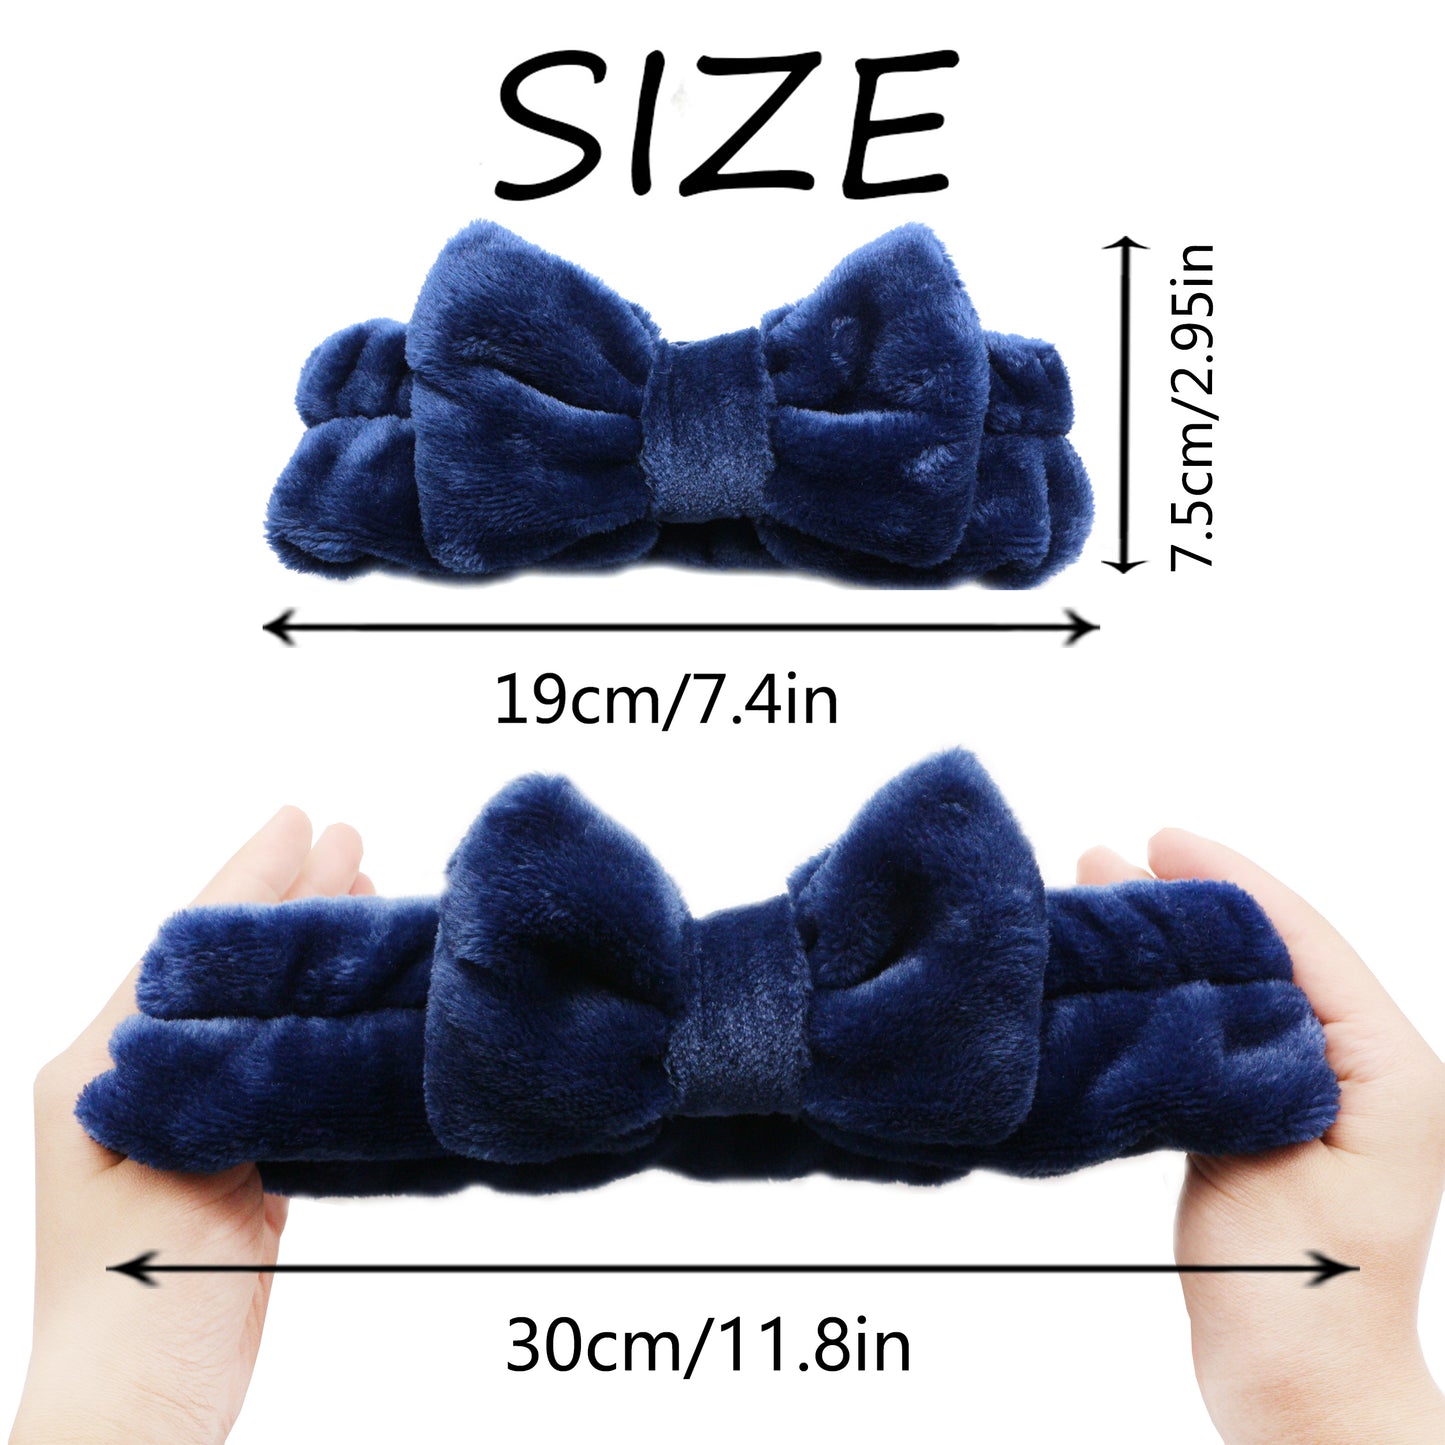 BSCI Audited Factory 2Pcs Cute Bowknot Bow Makeup Cosmetic Headbands for Washing Face Shower Hairbands, Spa Headbands for Women